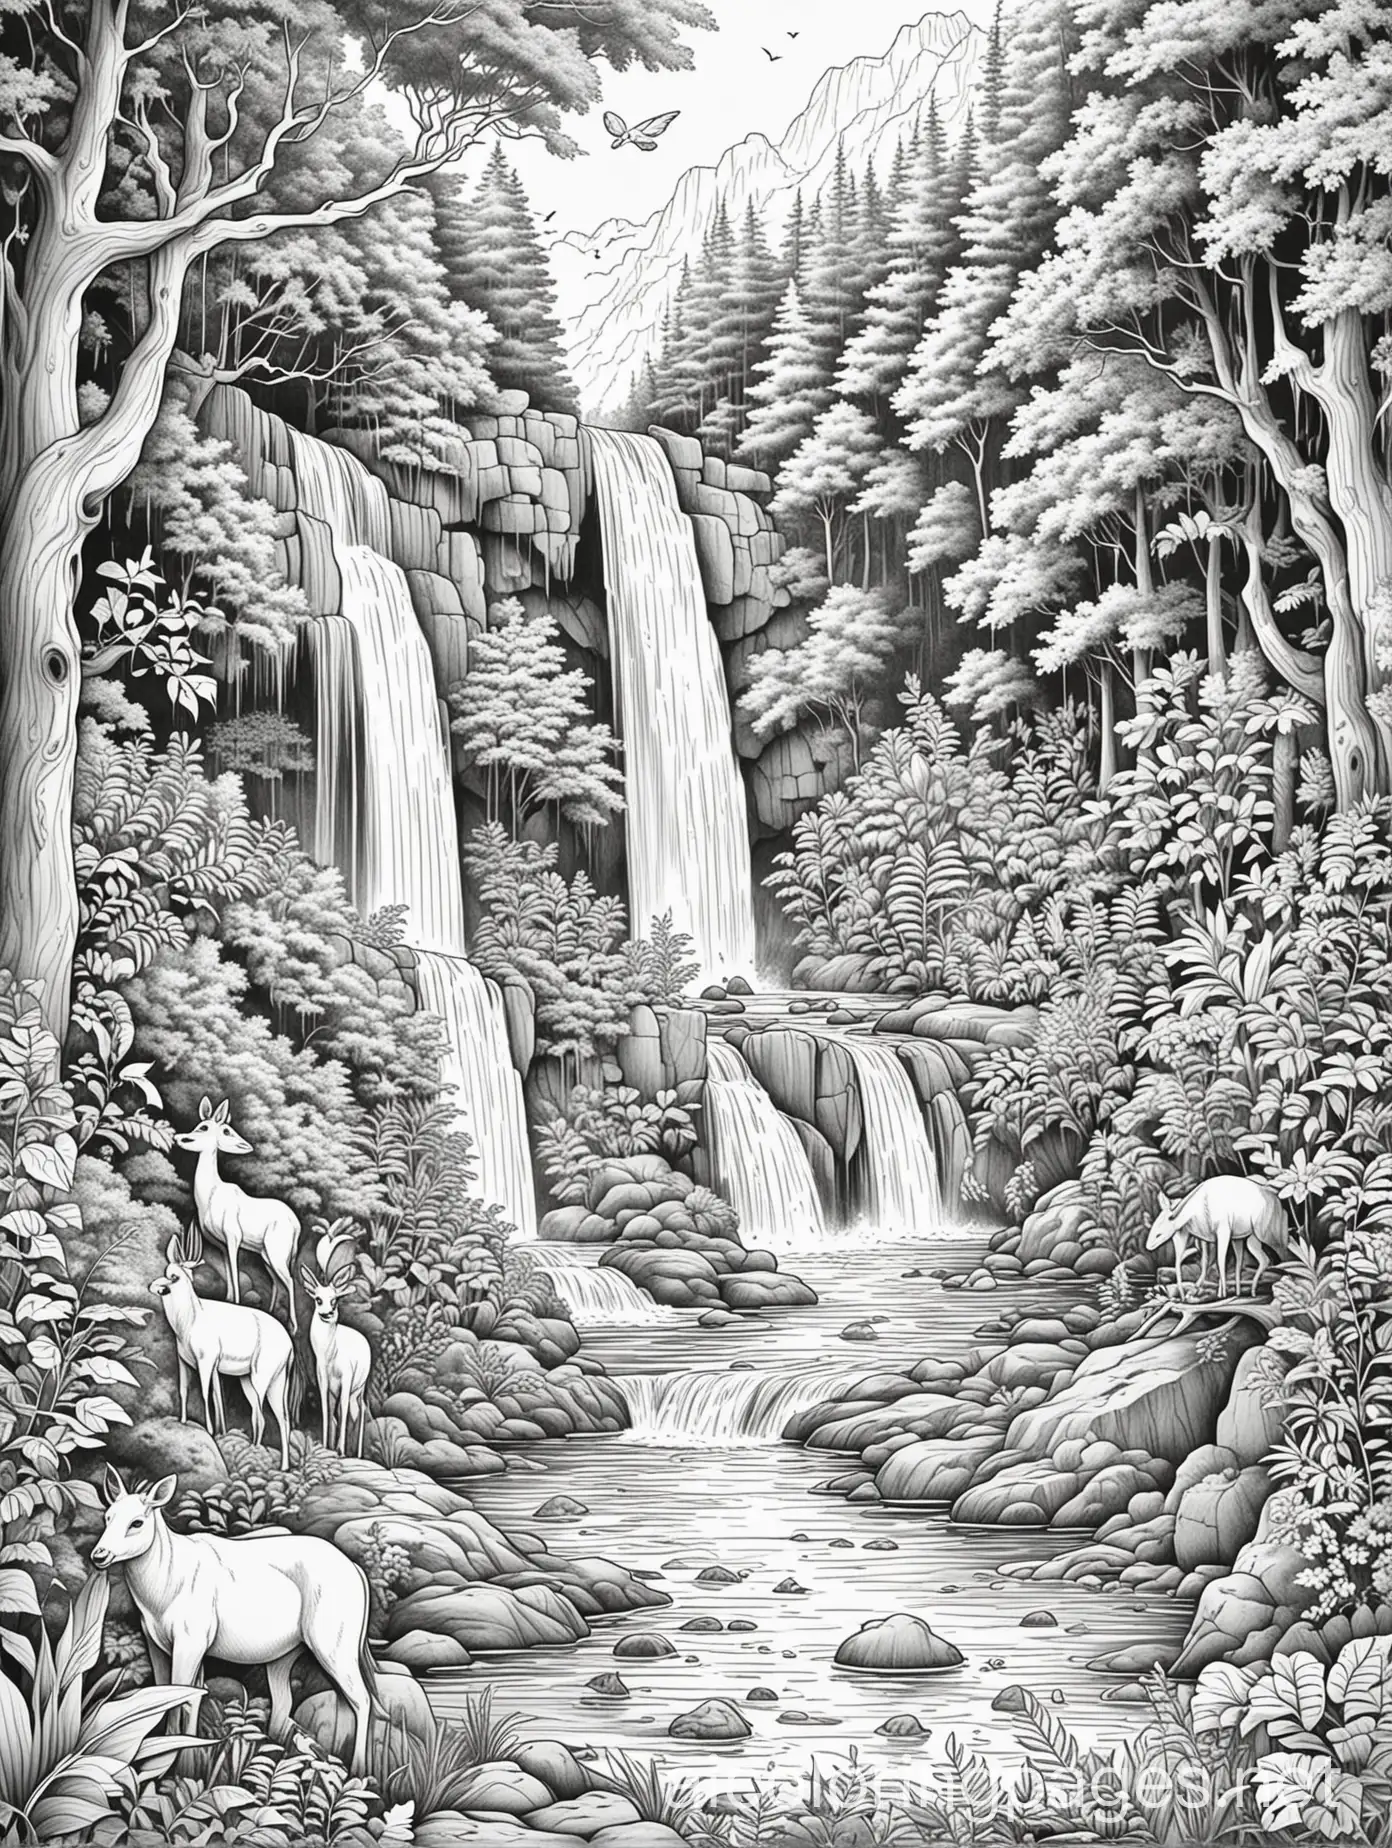 A picturesque waterfall hidden deep in the forest with playful animals splashing around and mystical creatures nearby., Coloring Page, black and white, line art, white background, Simplicity, Ample White Space. The background of the coloring page is plain white to make it easy for young children to color within the lines. The outlines of all the subjects are easy to distinguish, making it simple for kids to color without too much difficulty